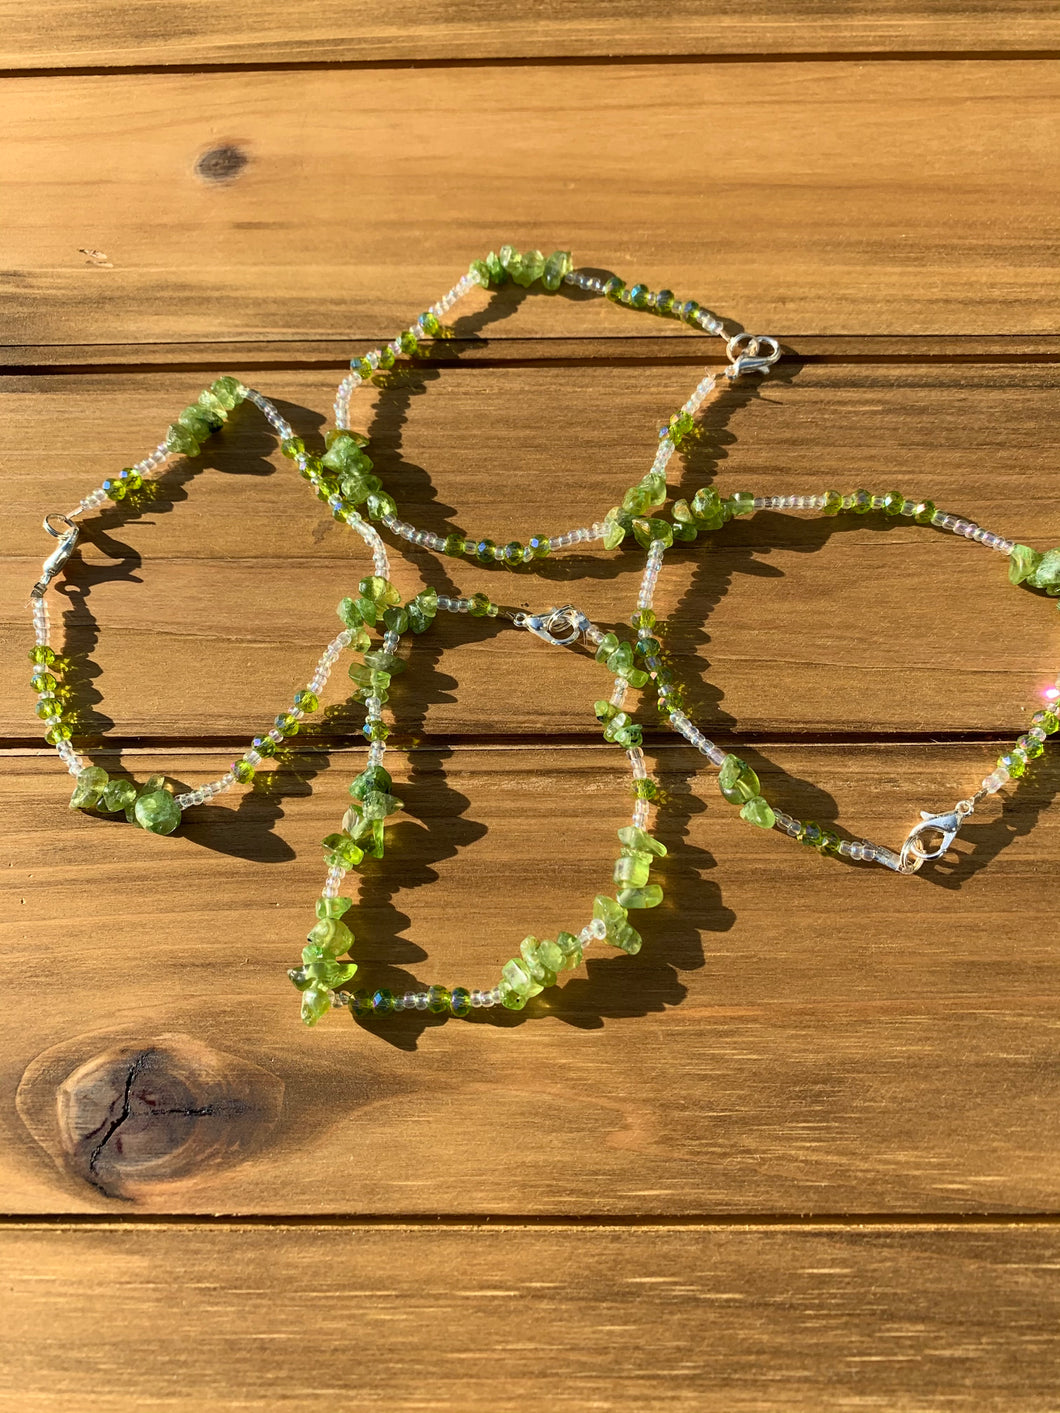 Peridot Anklets